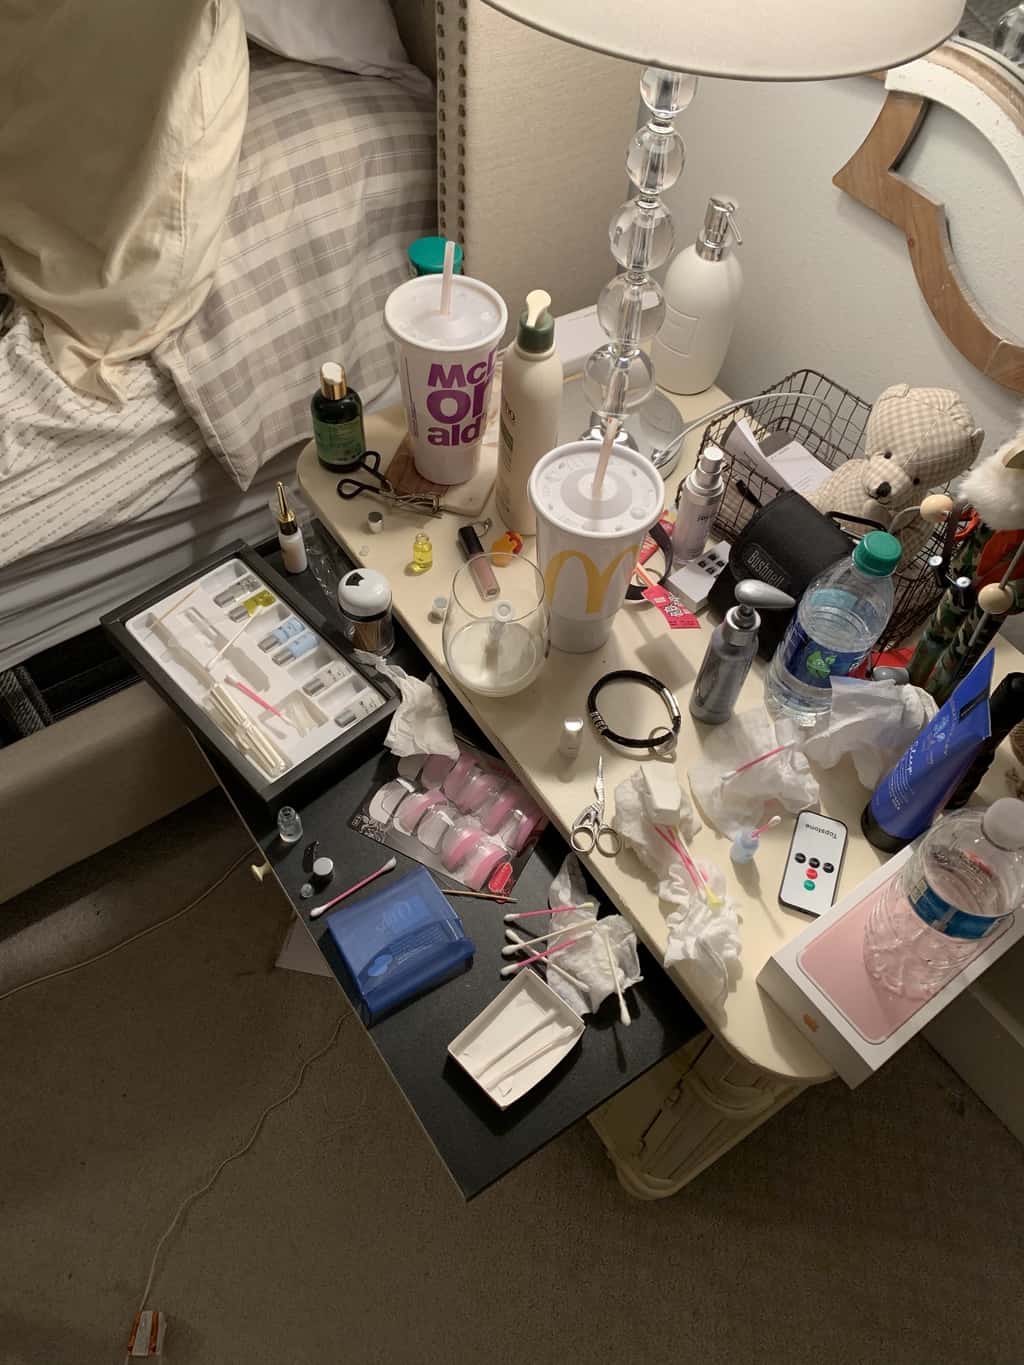 A table full of junk. Husbands side of the bed. 2 Mcdonalds cups, a wine glass with milk and a syringe, q-tips, eyelash kit, wet wipes, a bottle of water, lotion, and another bottle of lotions, and a remote and a big mess.